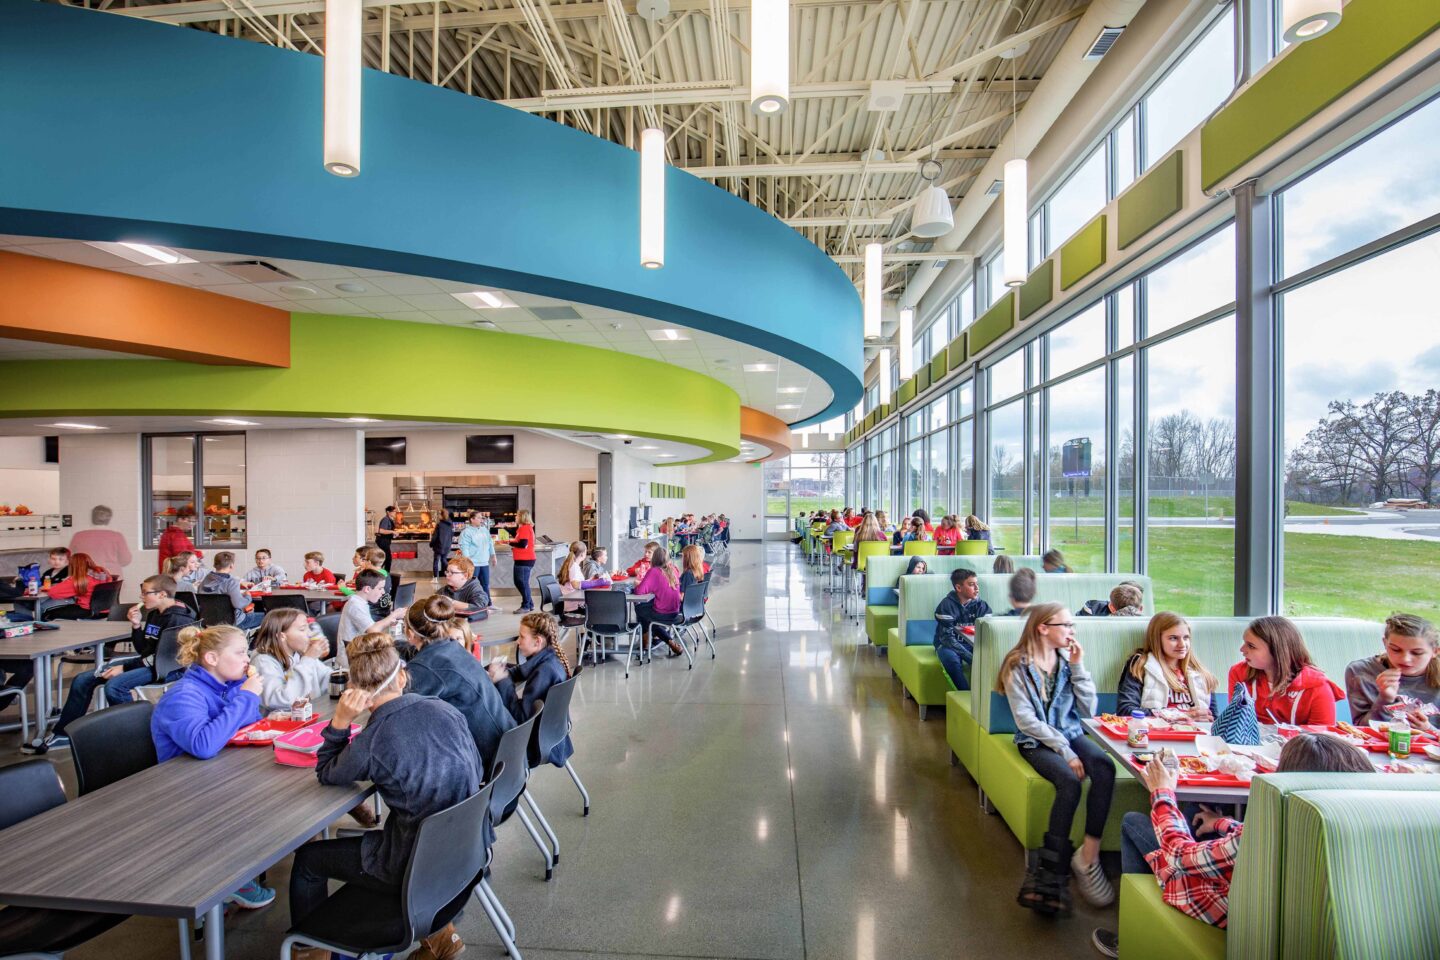 Students eat in the middle school cafeteria, which features brightly-colored soffits and a large glass curtain wall